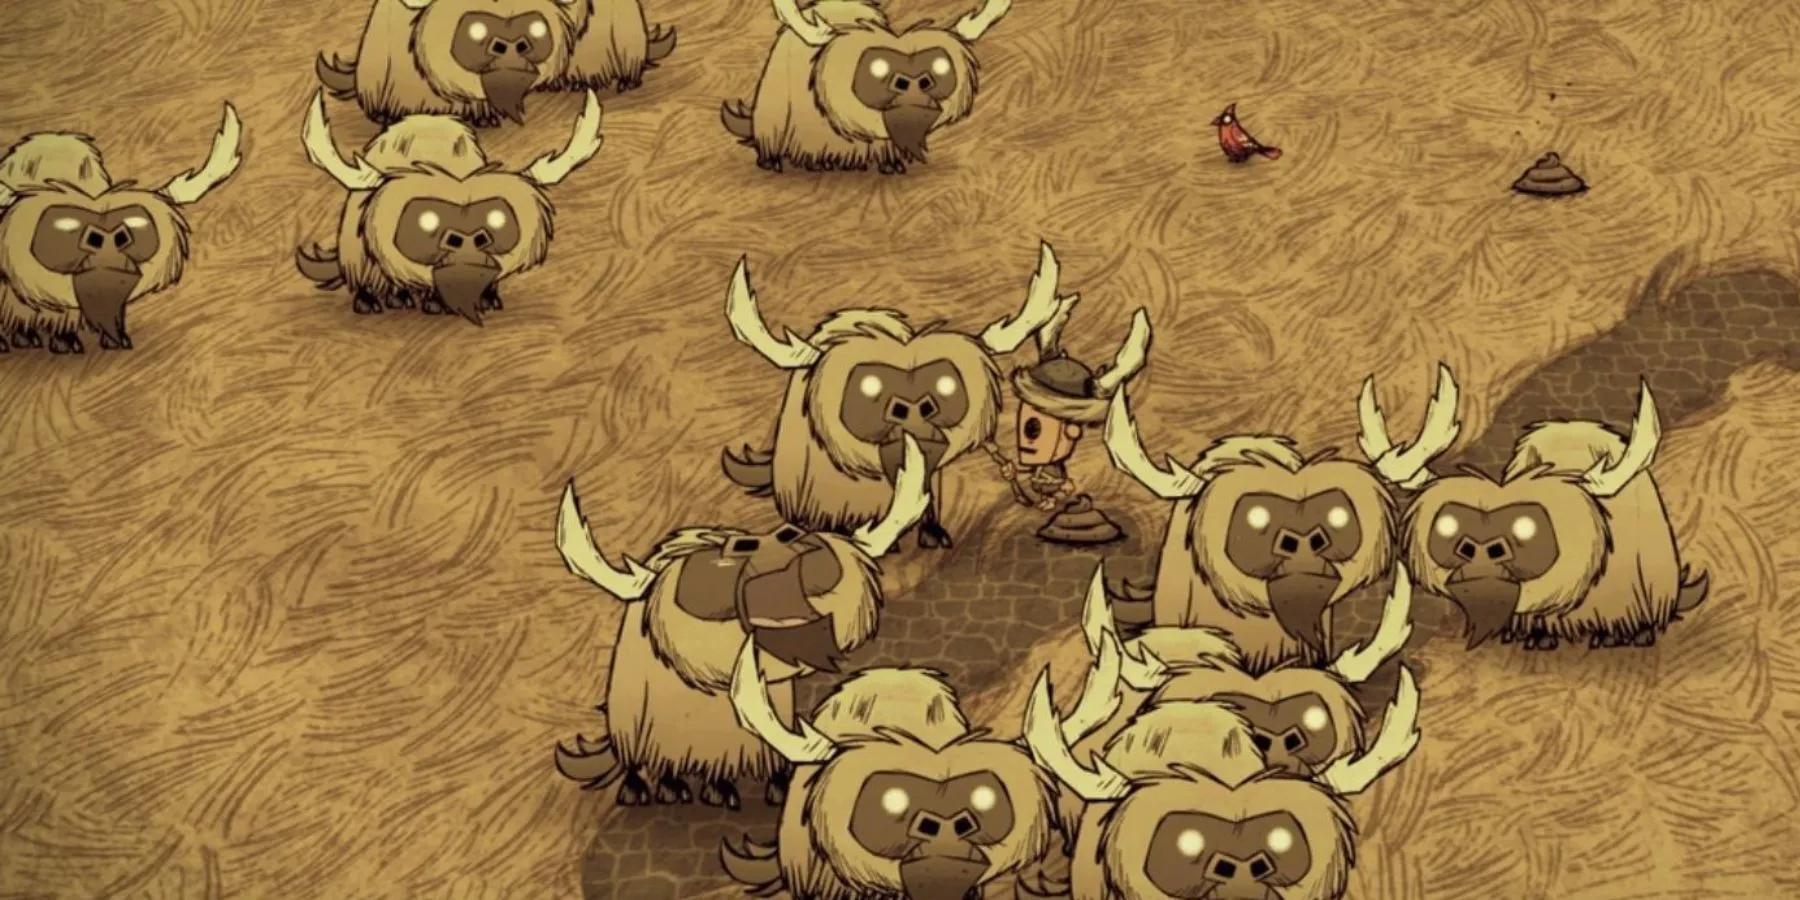 Don't Starve player surrounded by Beefalo